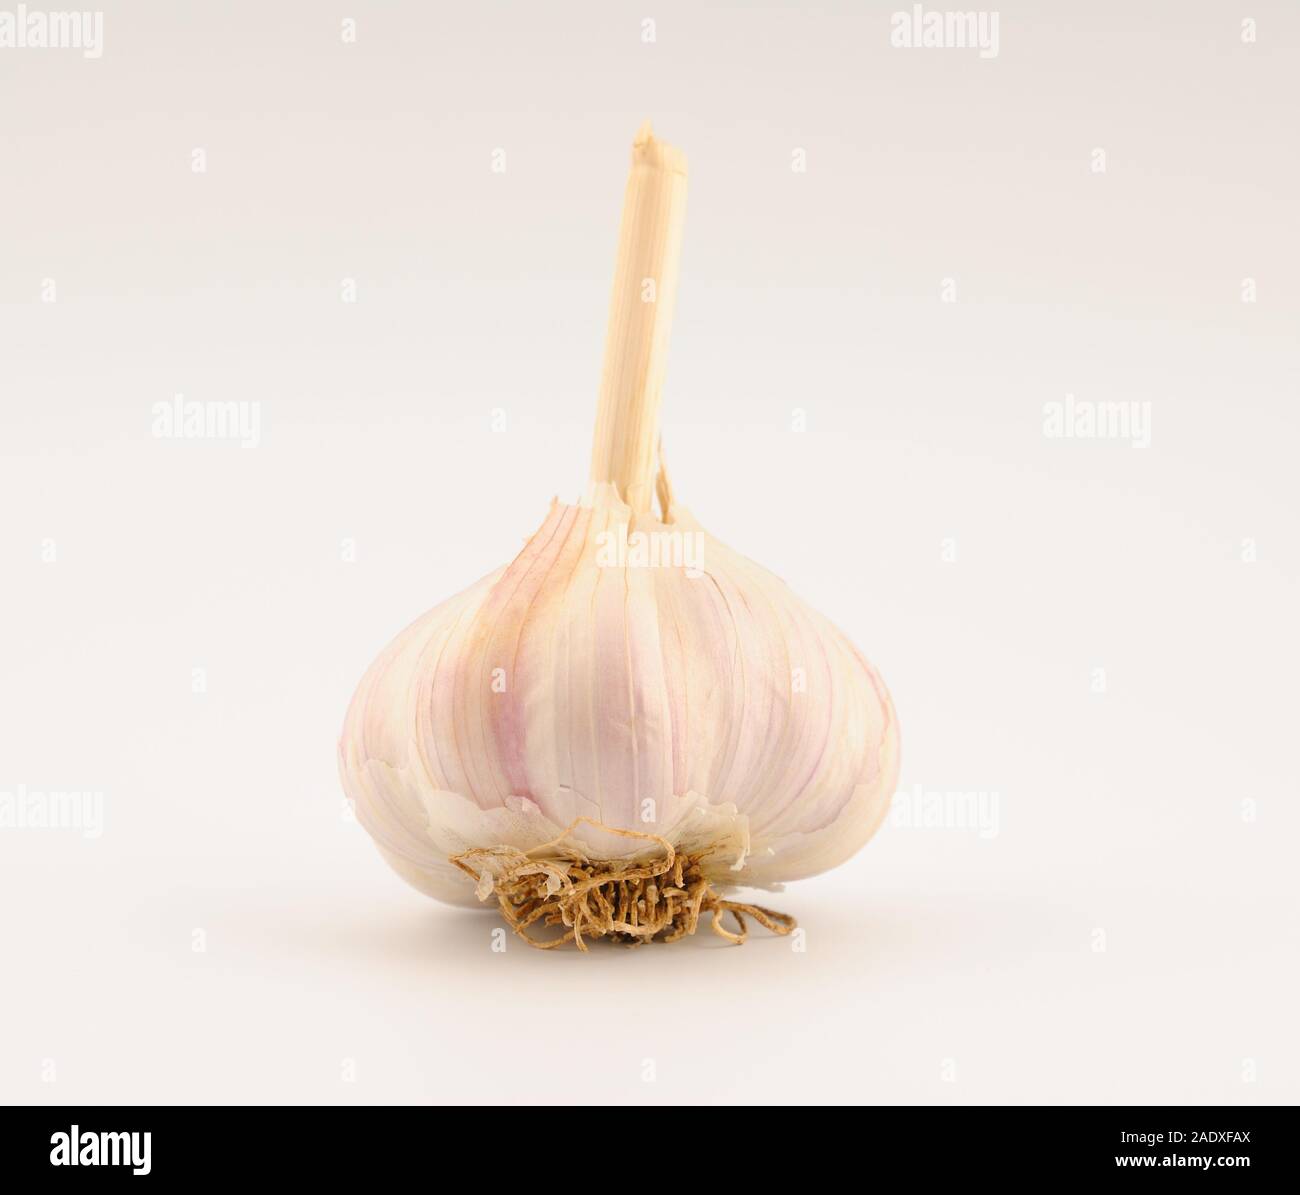 Head of garlic isolated on a white background Stock Photo